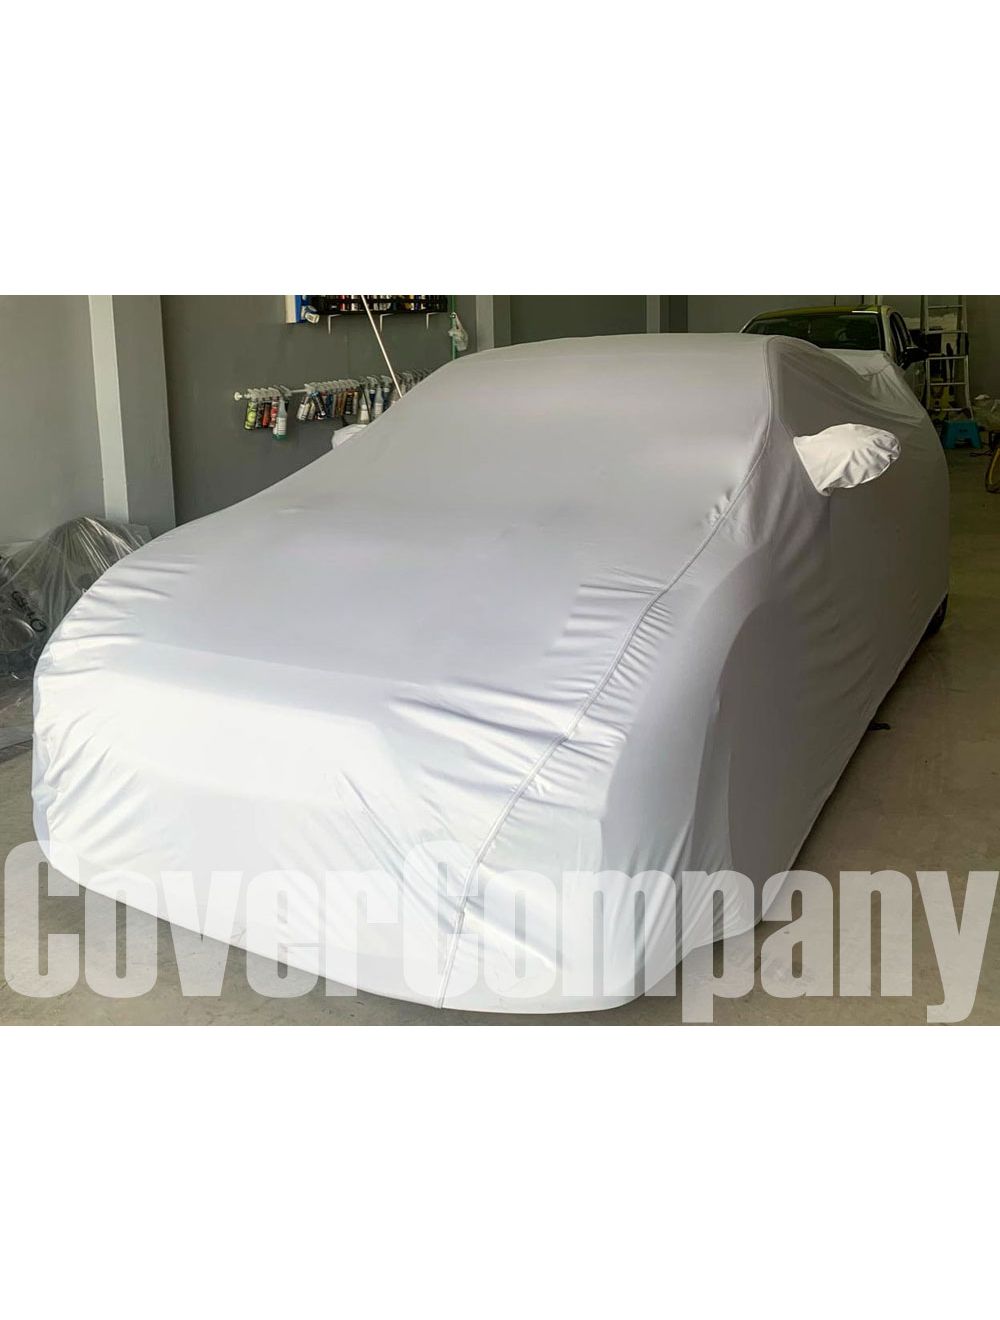 Black Car Cover for Nissan Note Water Resistant & Breathable Full Car Covers